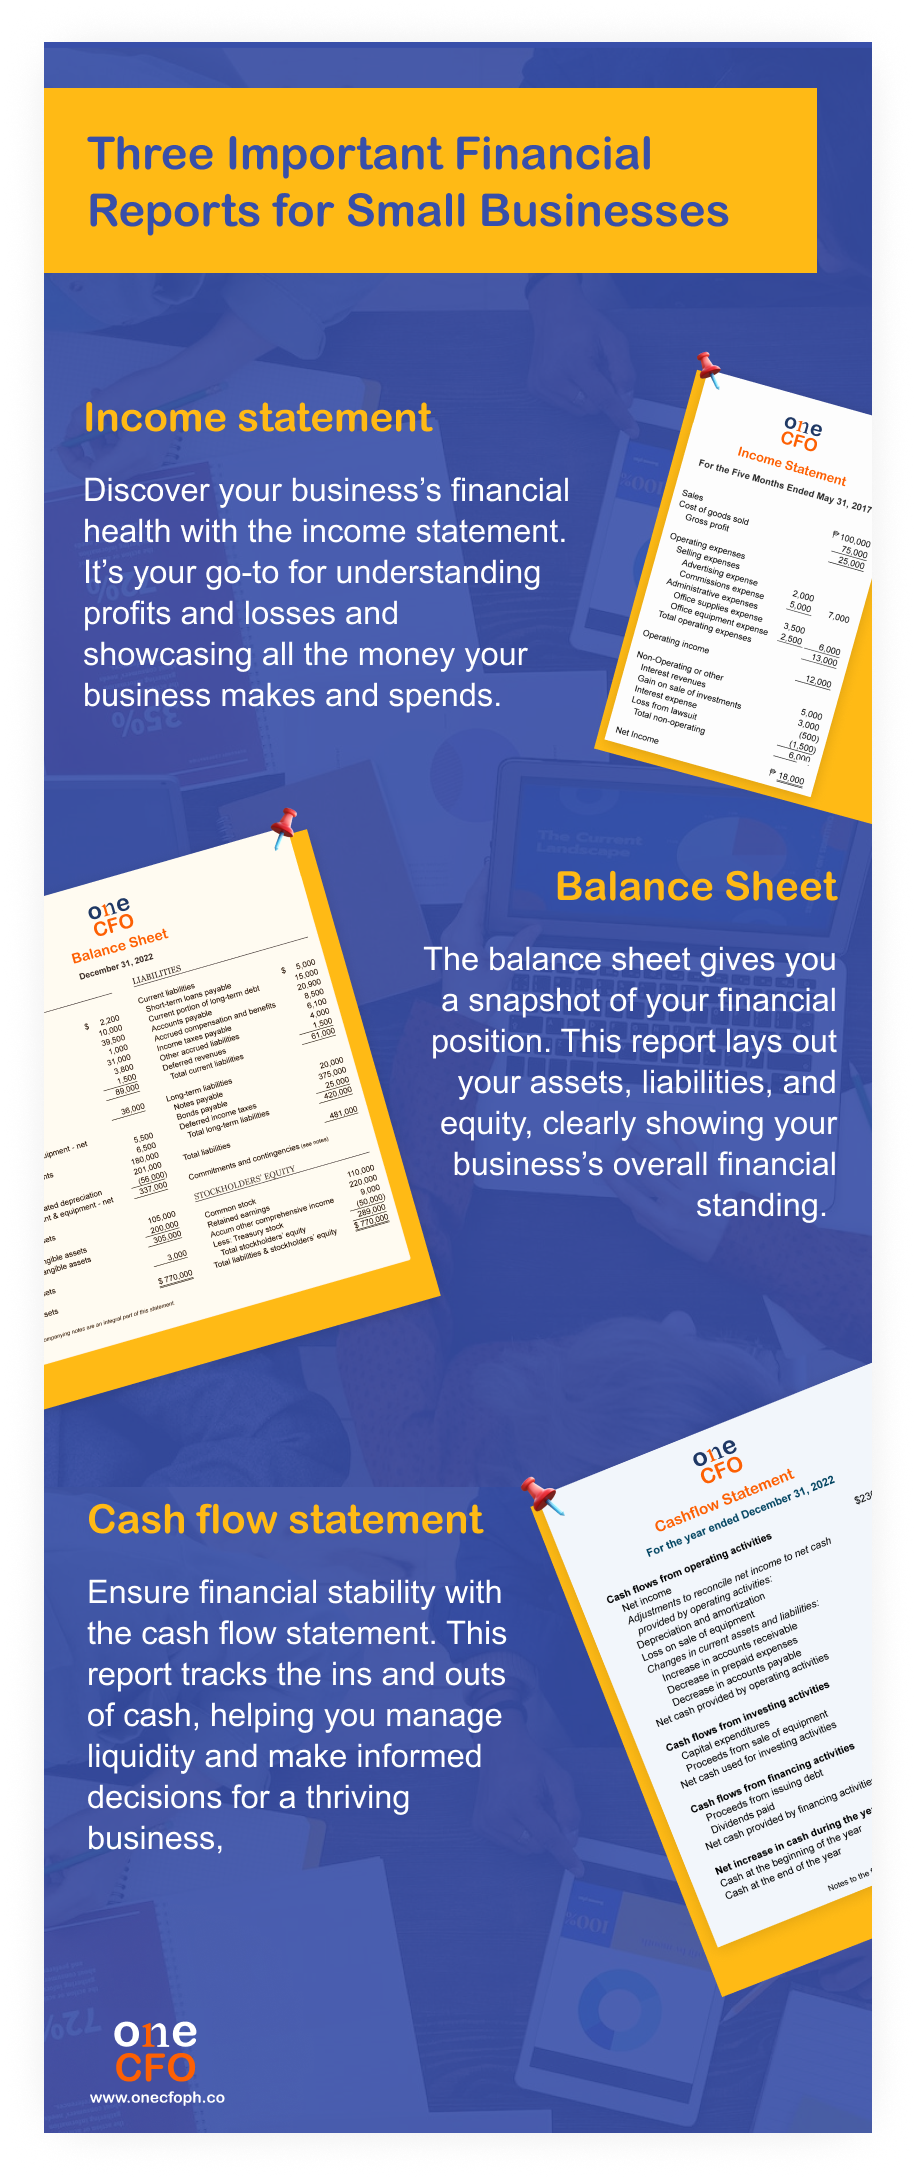 A small business should prepare three important financial statements